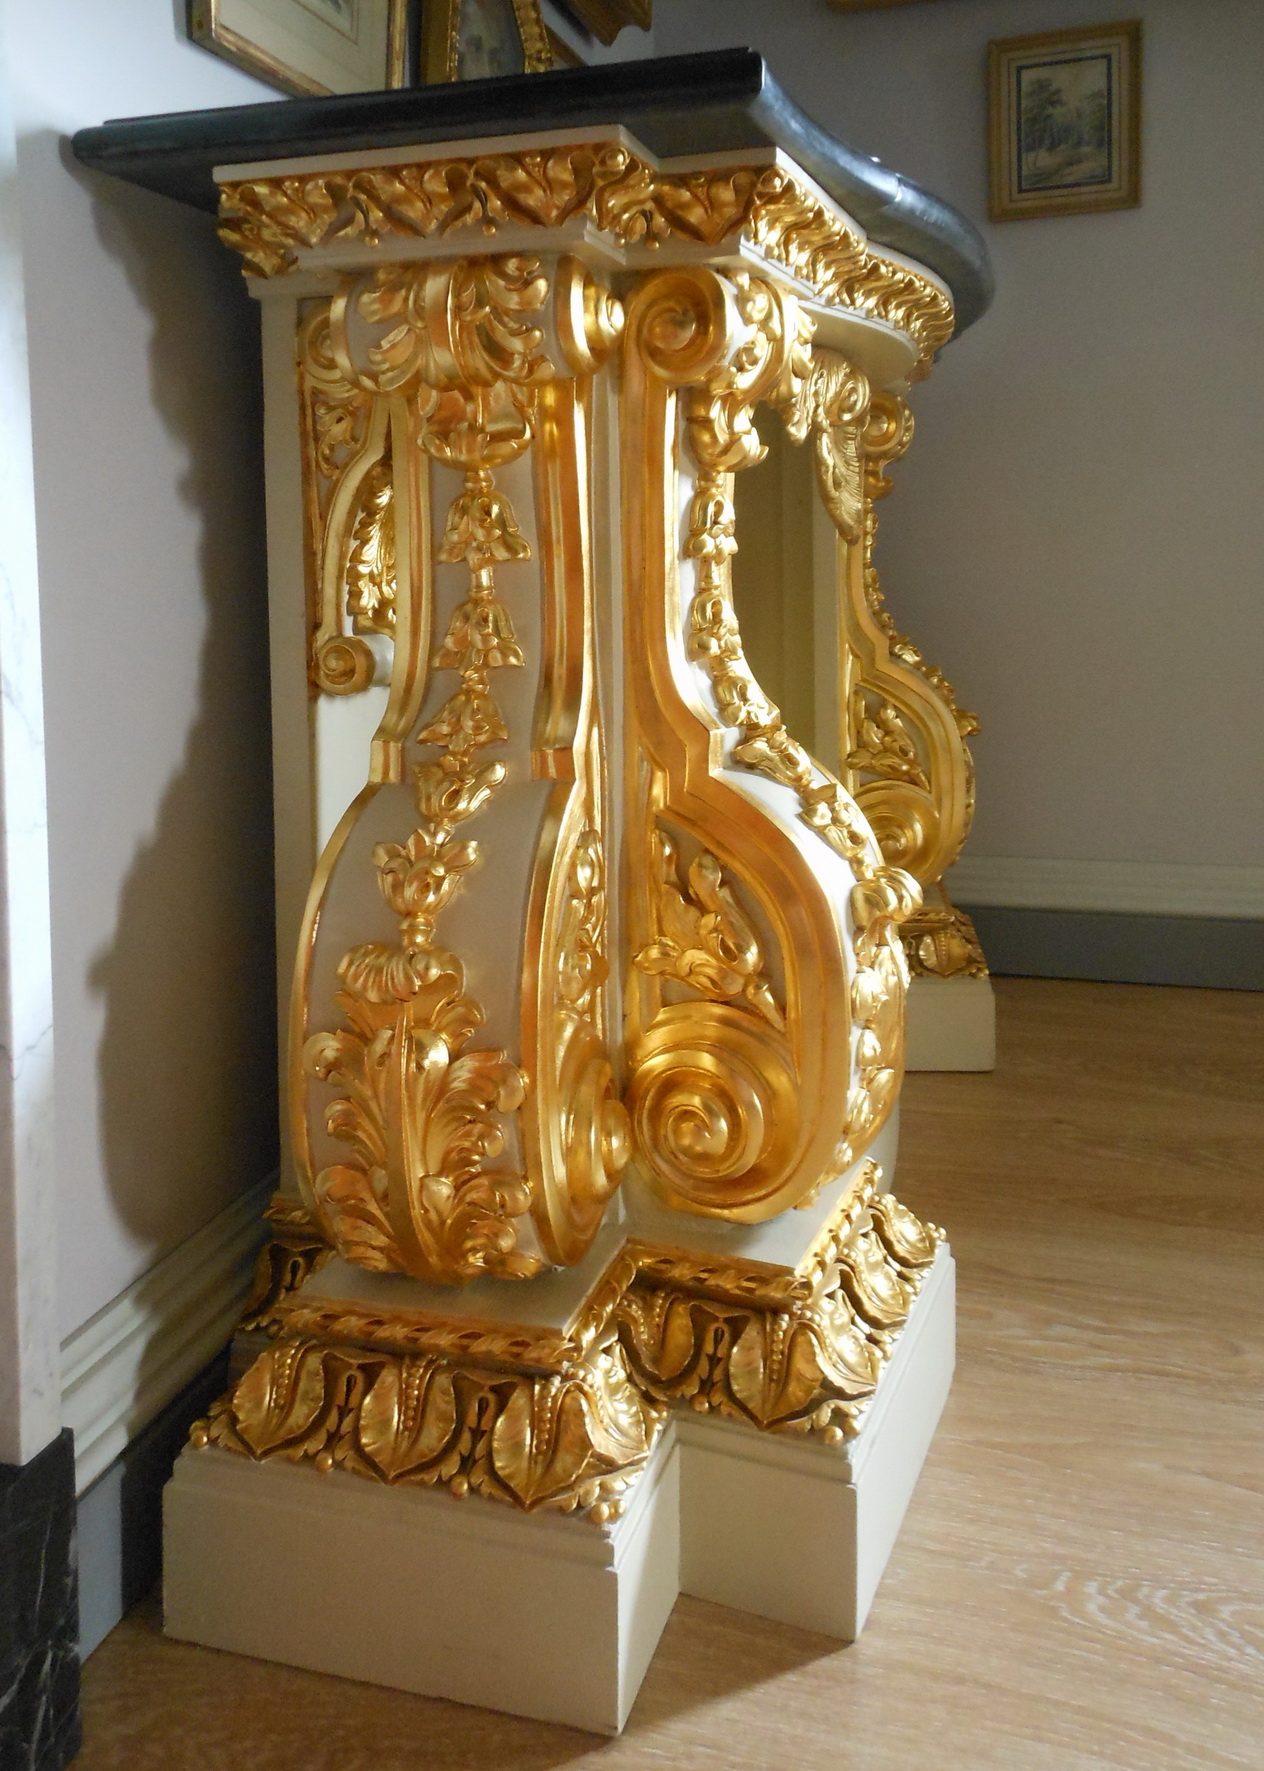 Console Salon table, following the William Kent manner. 